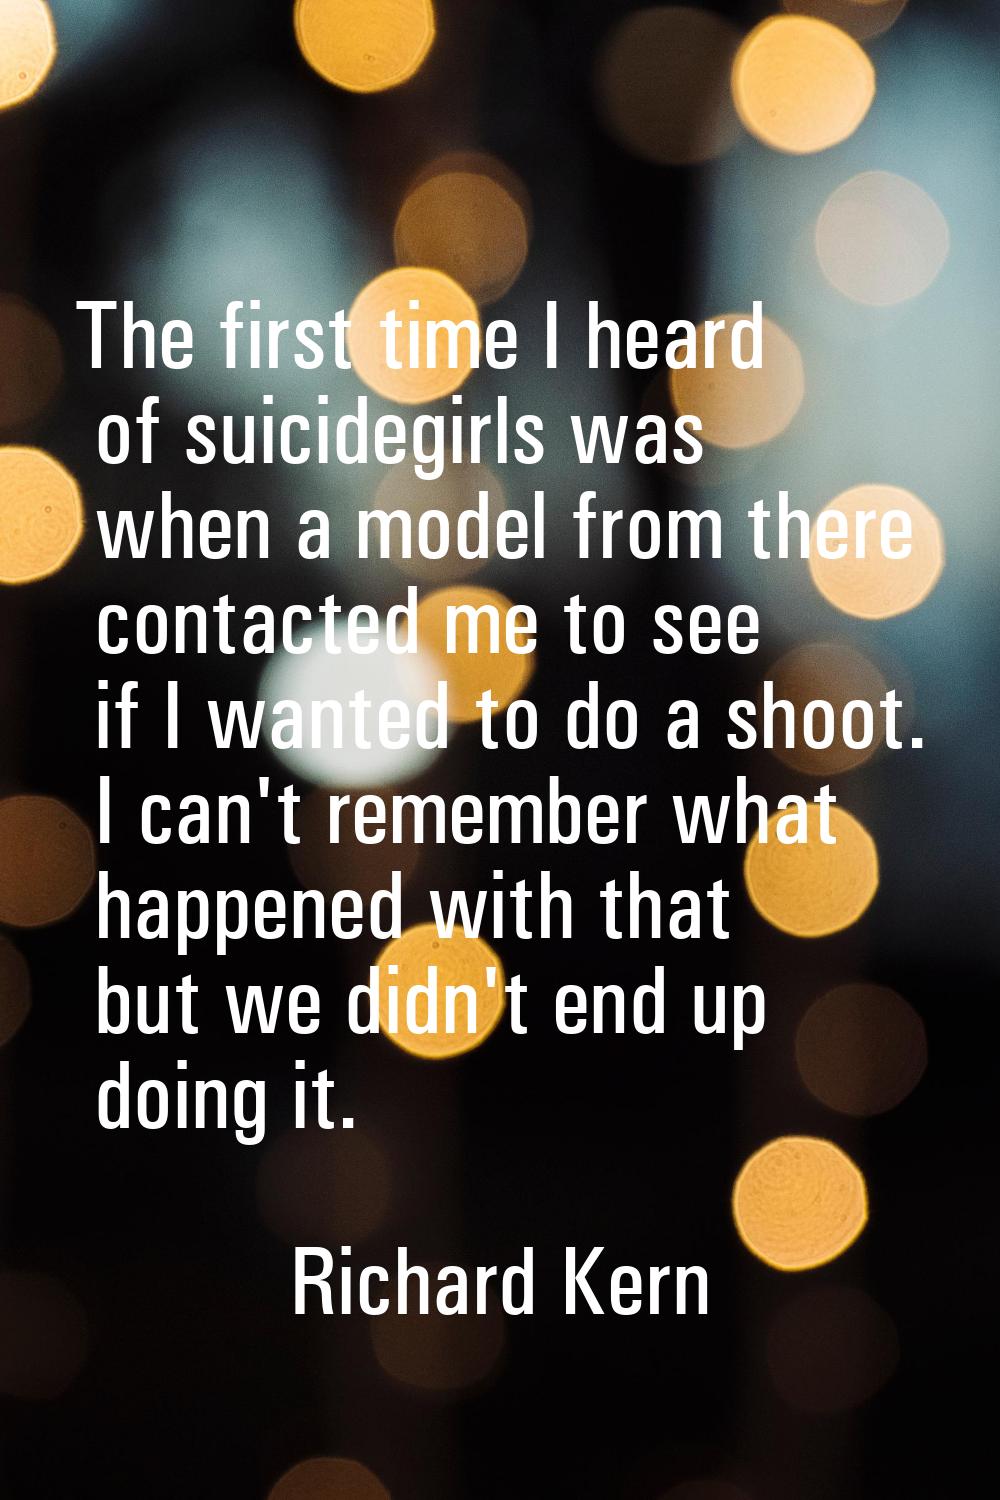 The first time I heard of suicidegirls was when a model from there contacted me to see if I wanted 